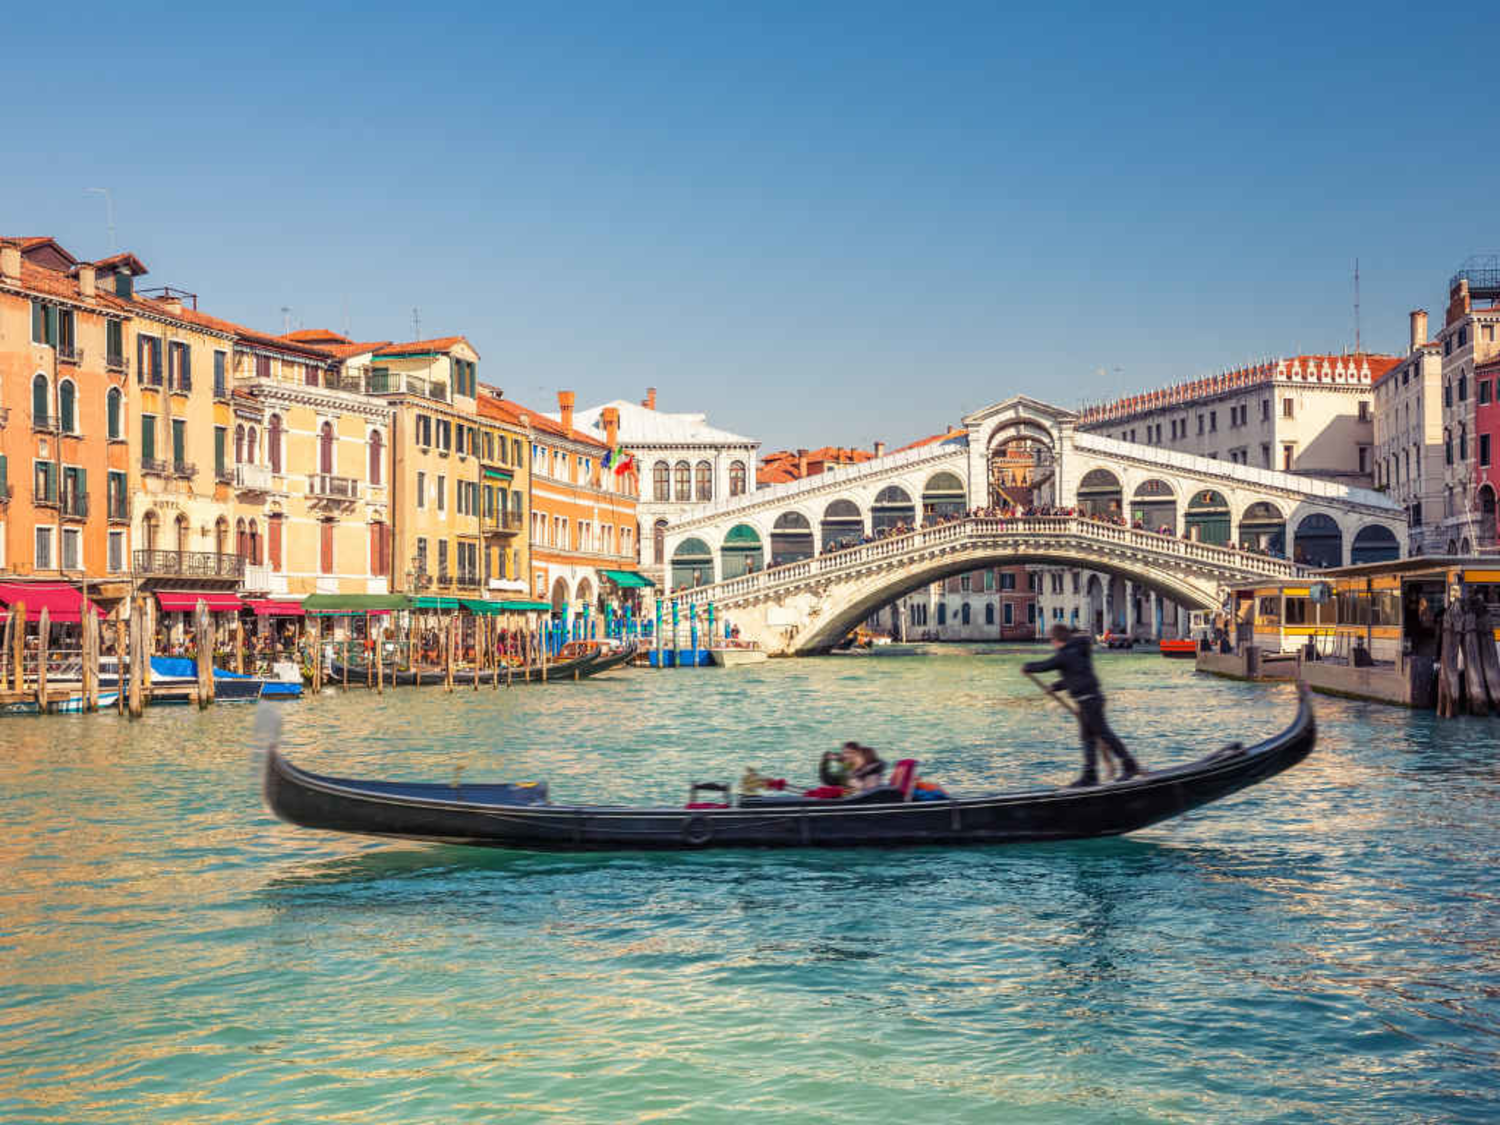 https://cdn.contexttravel.com/image/upload/w_1500,q_60/v1641337473/blog/Our%20Top%2013%20Venice%20Attractions%20and%20Their%20Histories:%20What%20They%20Are%20and%20Why%20You%20Need%20to%20Visit%20%20%28venice%20attractions%29/venice_on_water.png